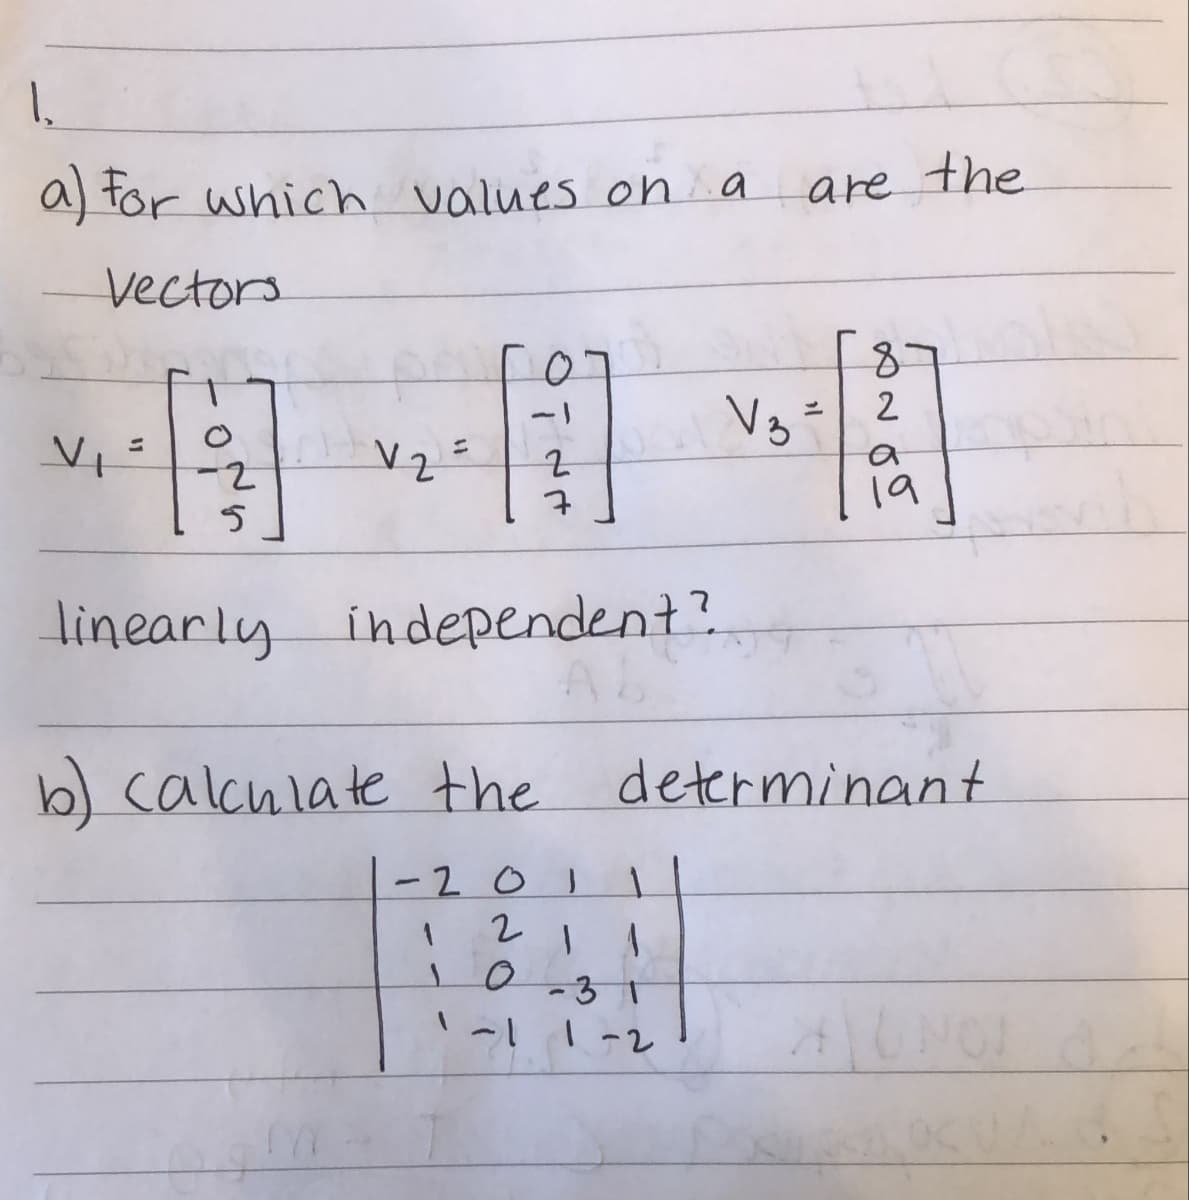 1.
a) for which values on a
are the
Vectors
%3D
%3D
a
2-
7
19
linearly independent?
b) calculate the determinant
-201
1
-3
